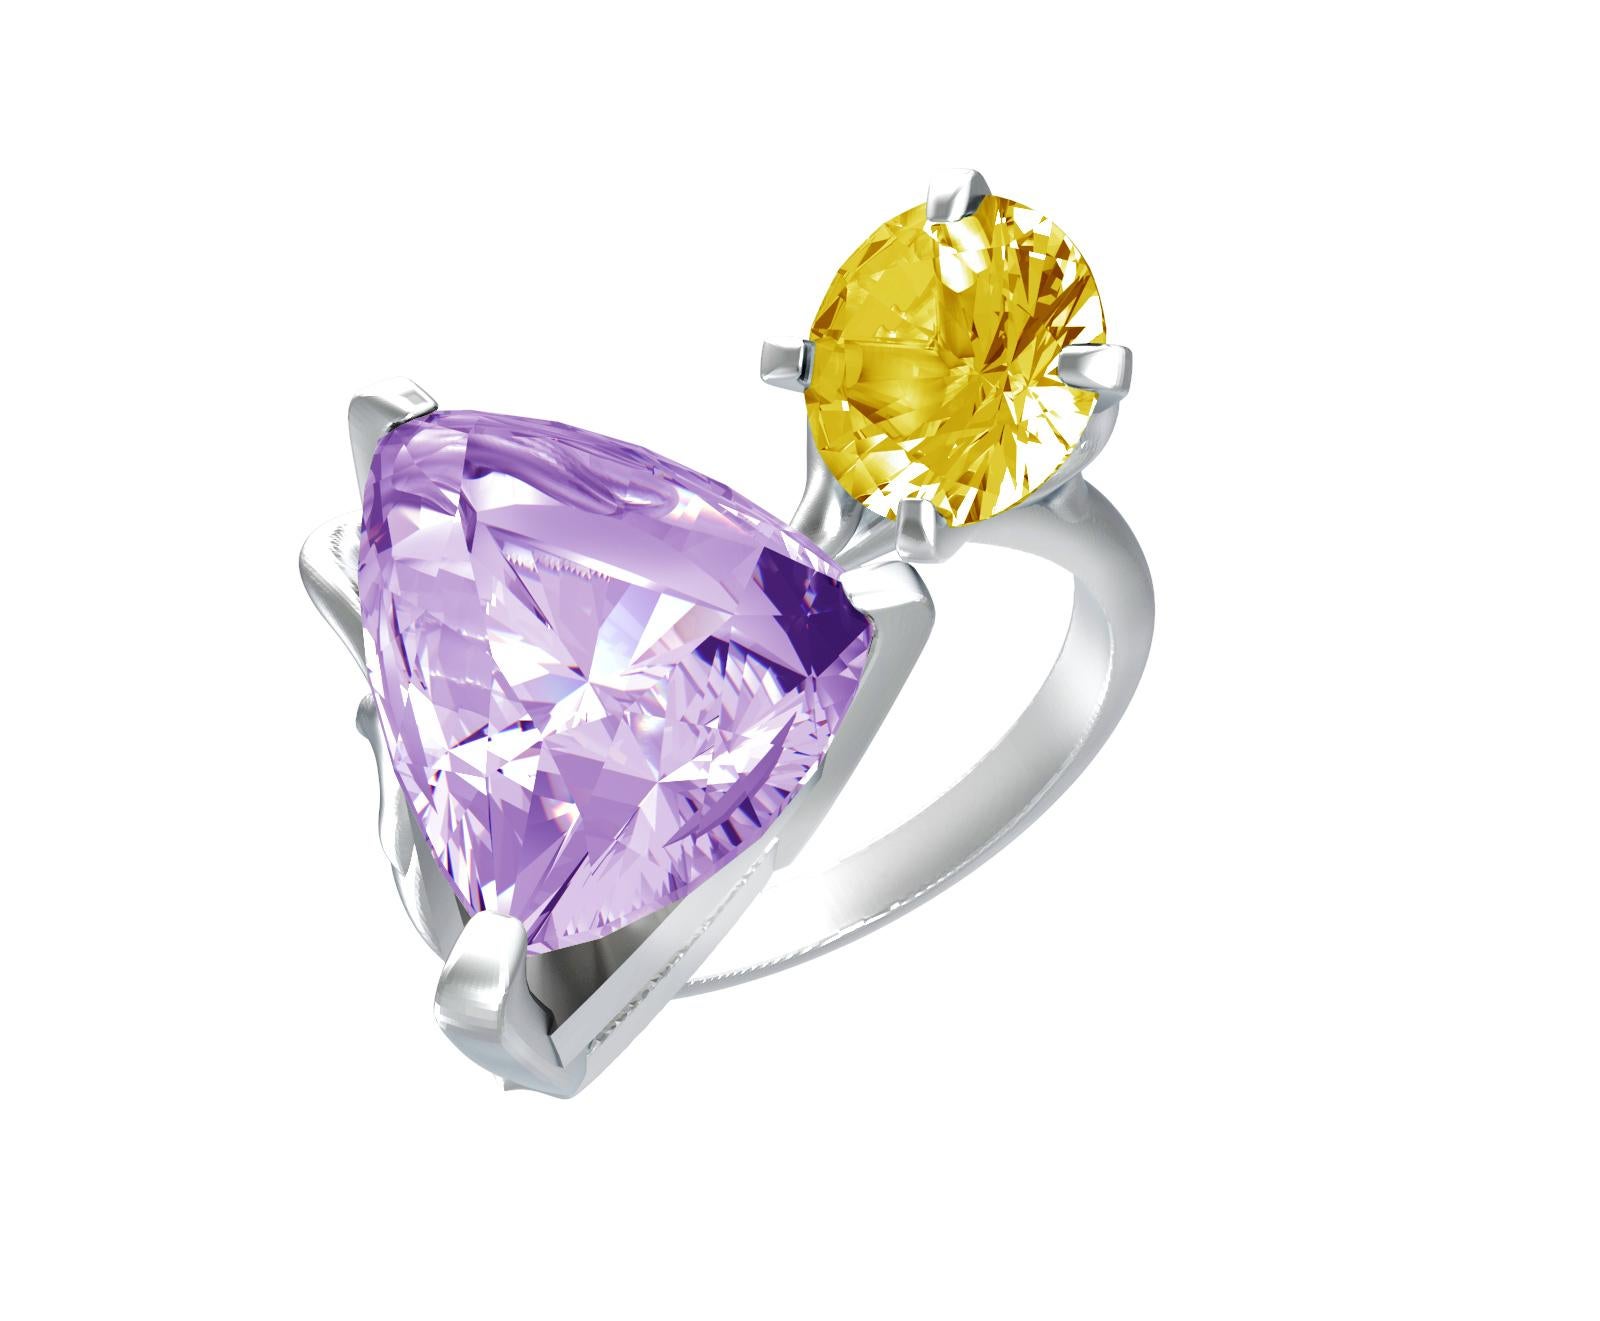 This contemporary engagement ring is made of 18 karat white gold with trillion cut amethyst and round cut citrine. The unusual angle of the gems placement makes it look even bigger, as a perfect cocktail ring. 

The ring will be custom made and can